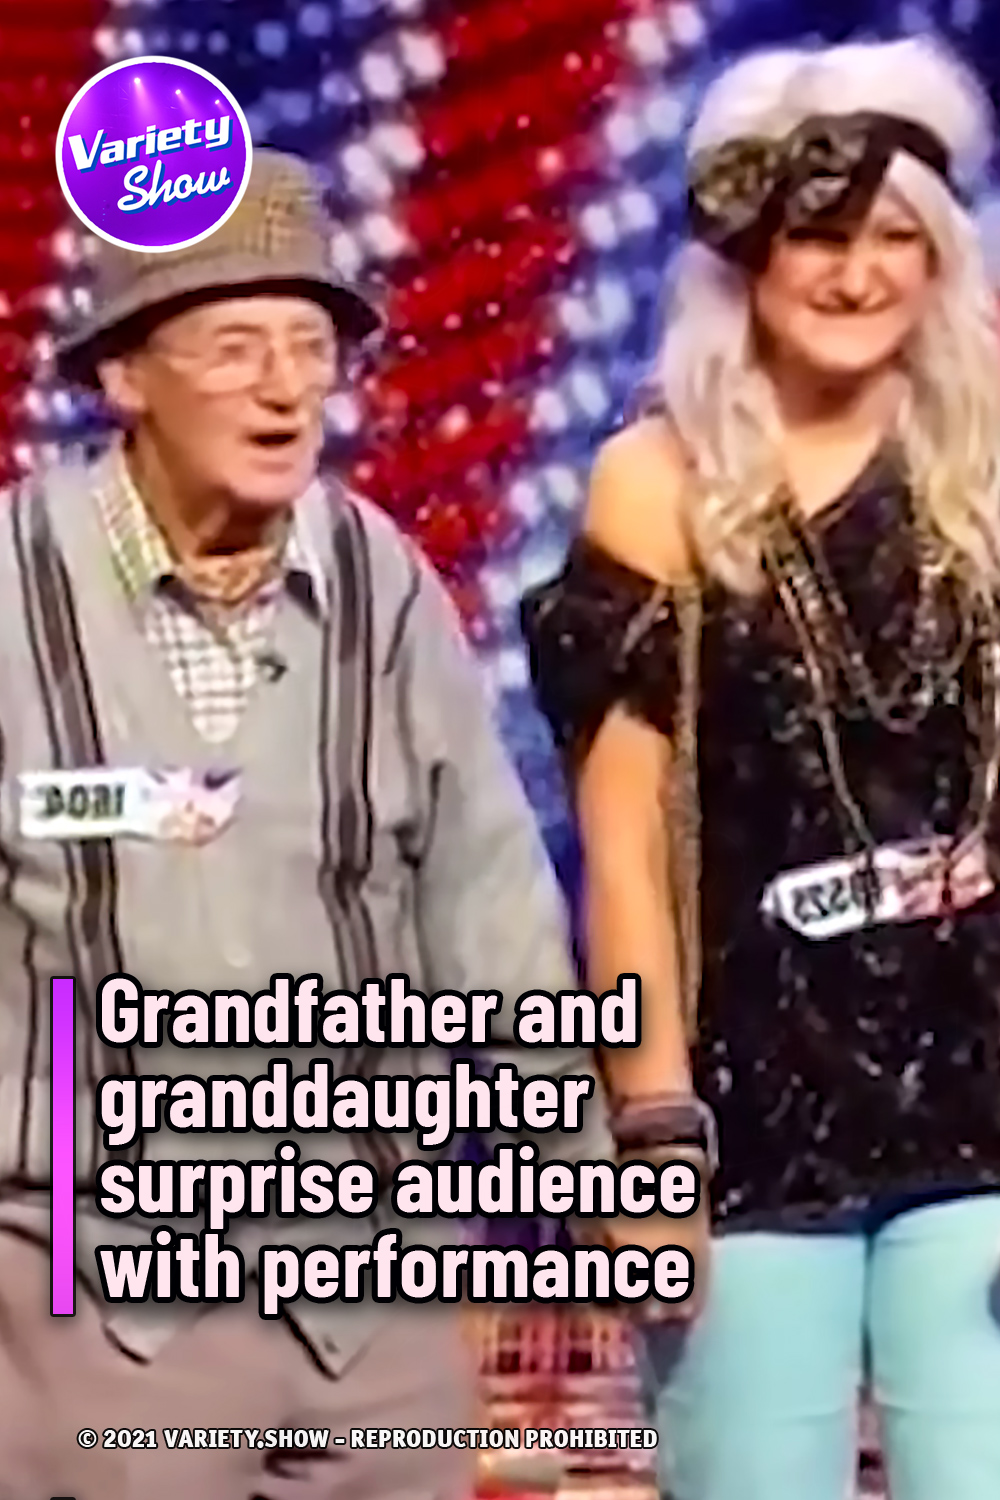 Grandfather and granddaughter surprise audience with performance